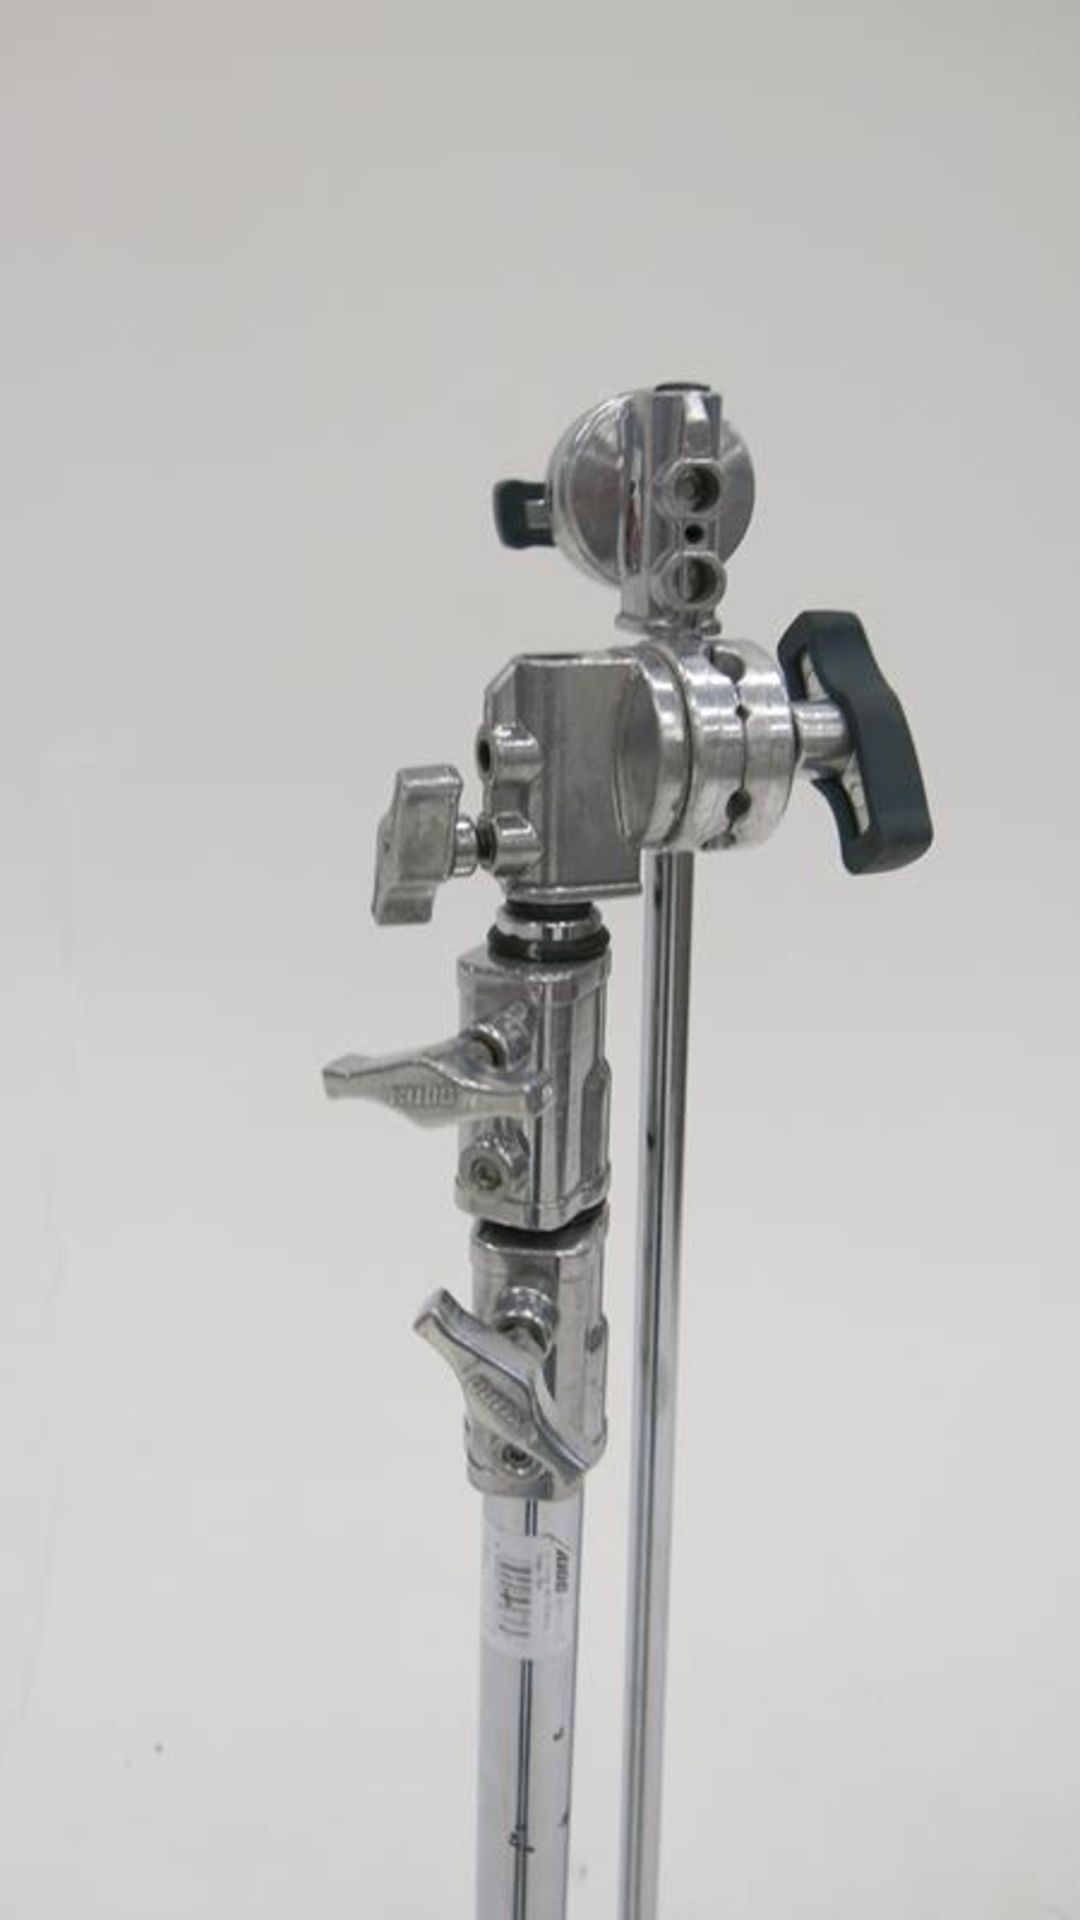 KUPO, KS702412, 40", ADJUSTABLE, CHROME PLATED, C-STAND WITH SLIDING LEGS WITH CLAMP ARM - Image 2 of 3